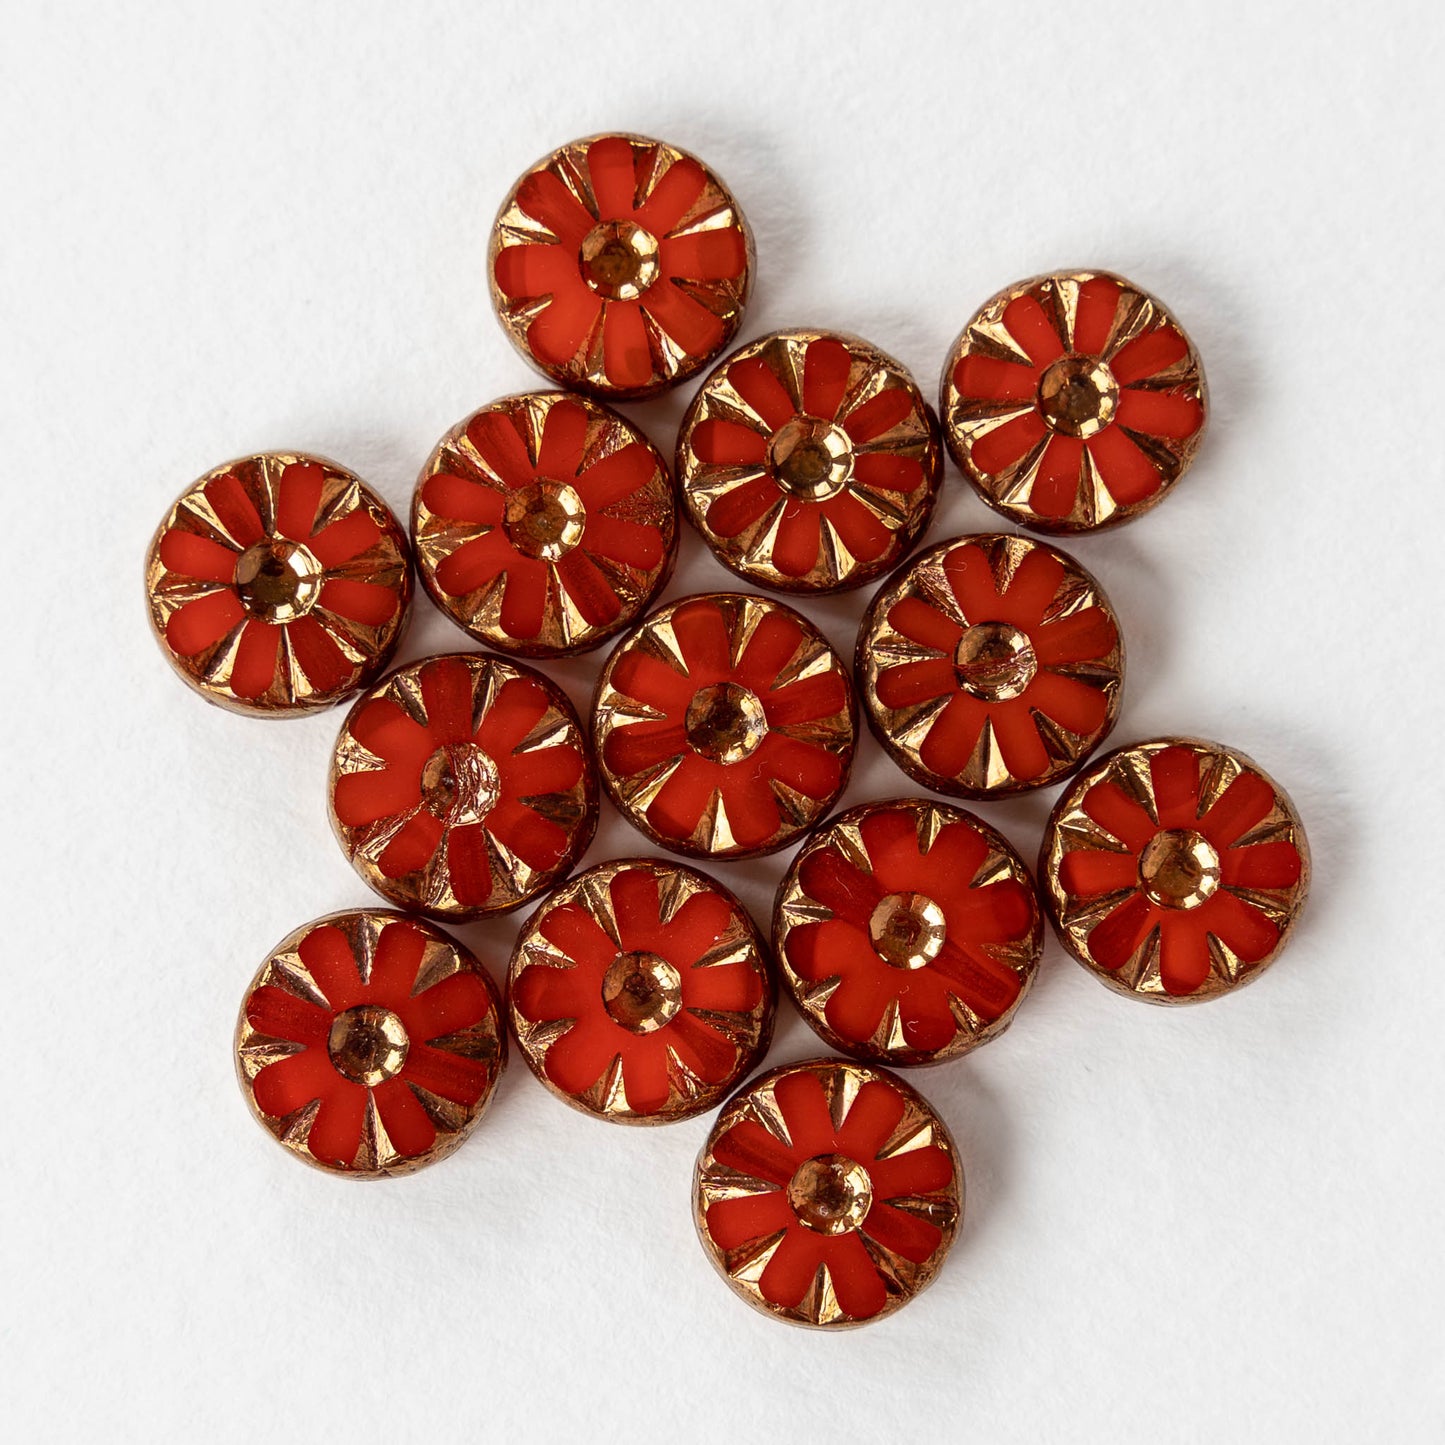 12mm Sunflower Coin Beads - Red with Bronze Wash - 6 or 12 Beads